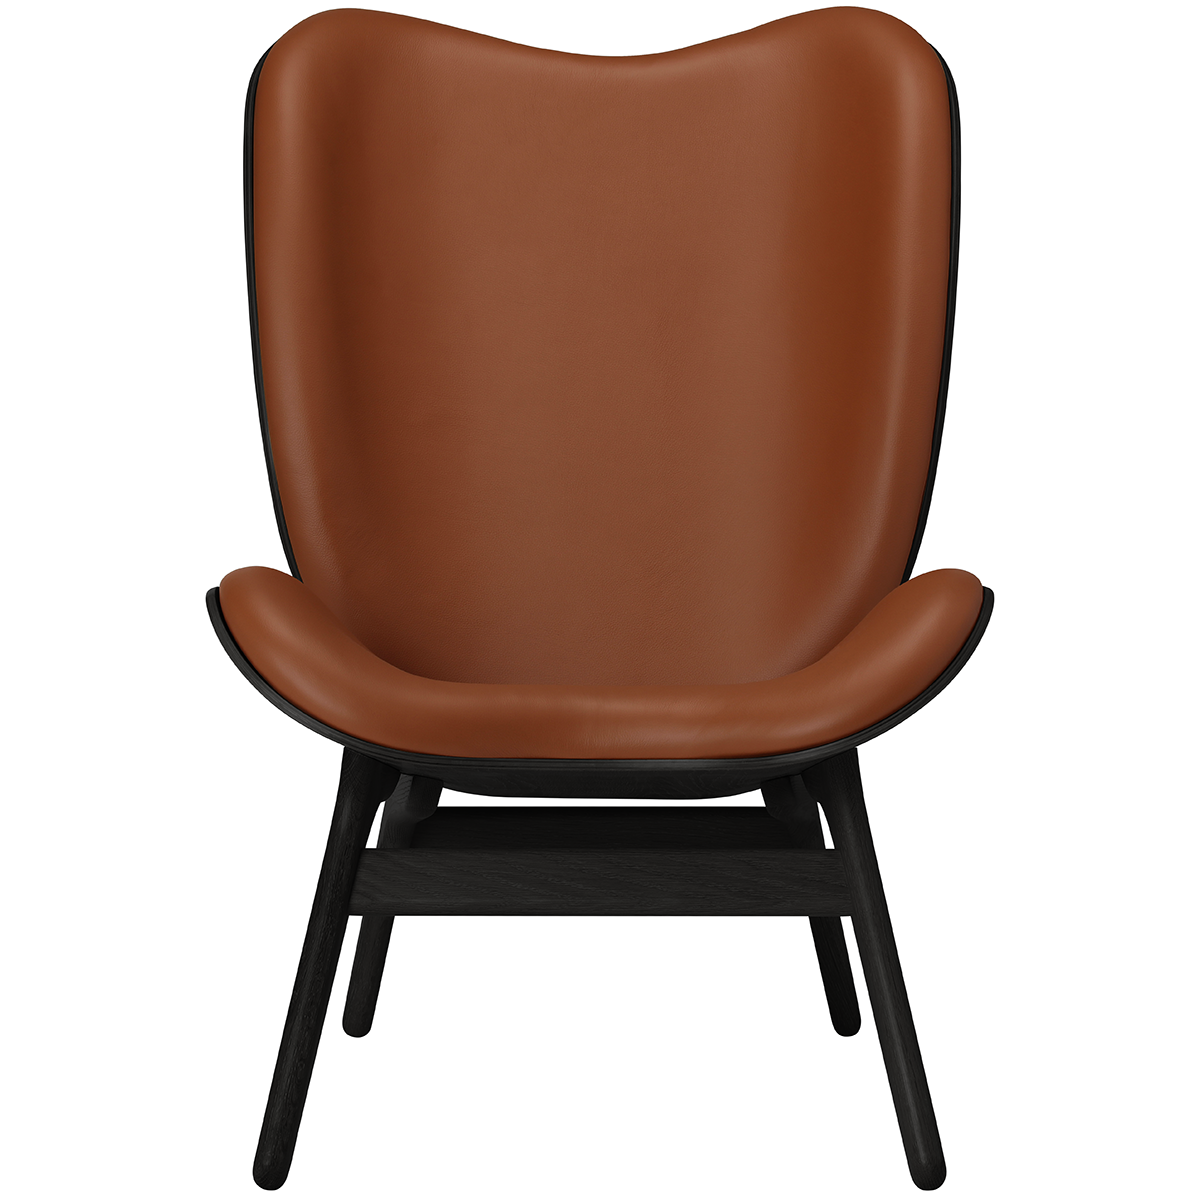 A Conversation Piece Leather Tall Lounge Chair